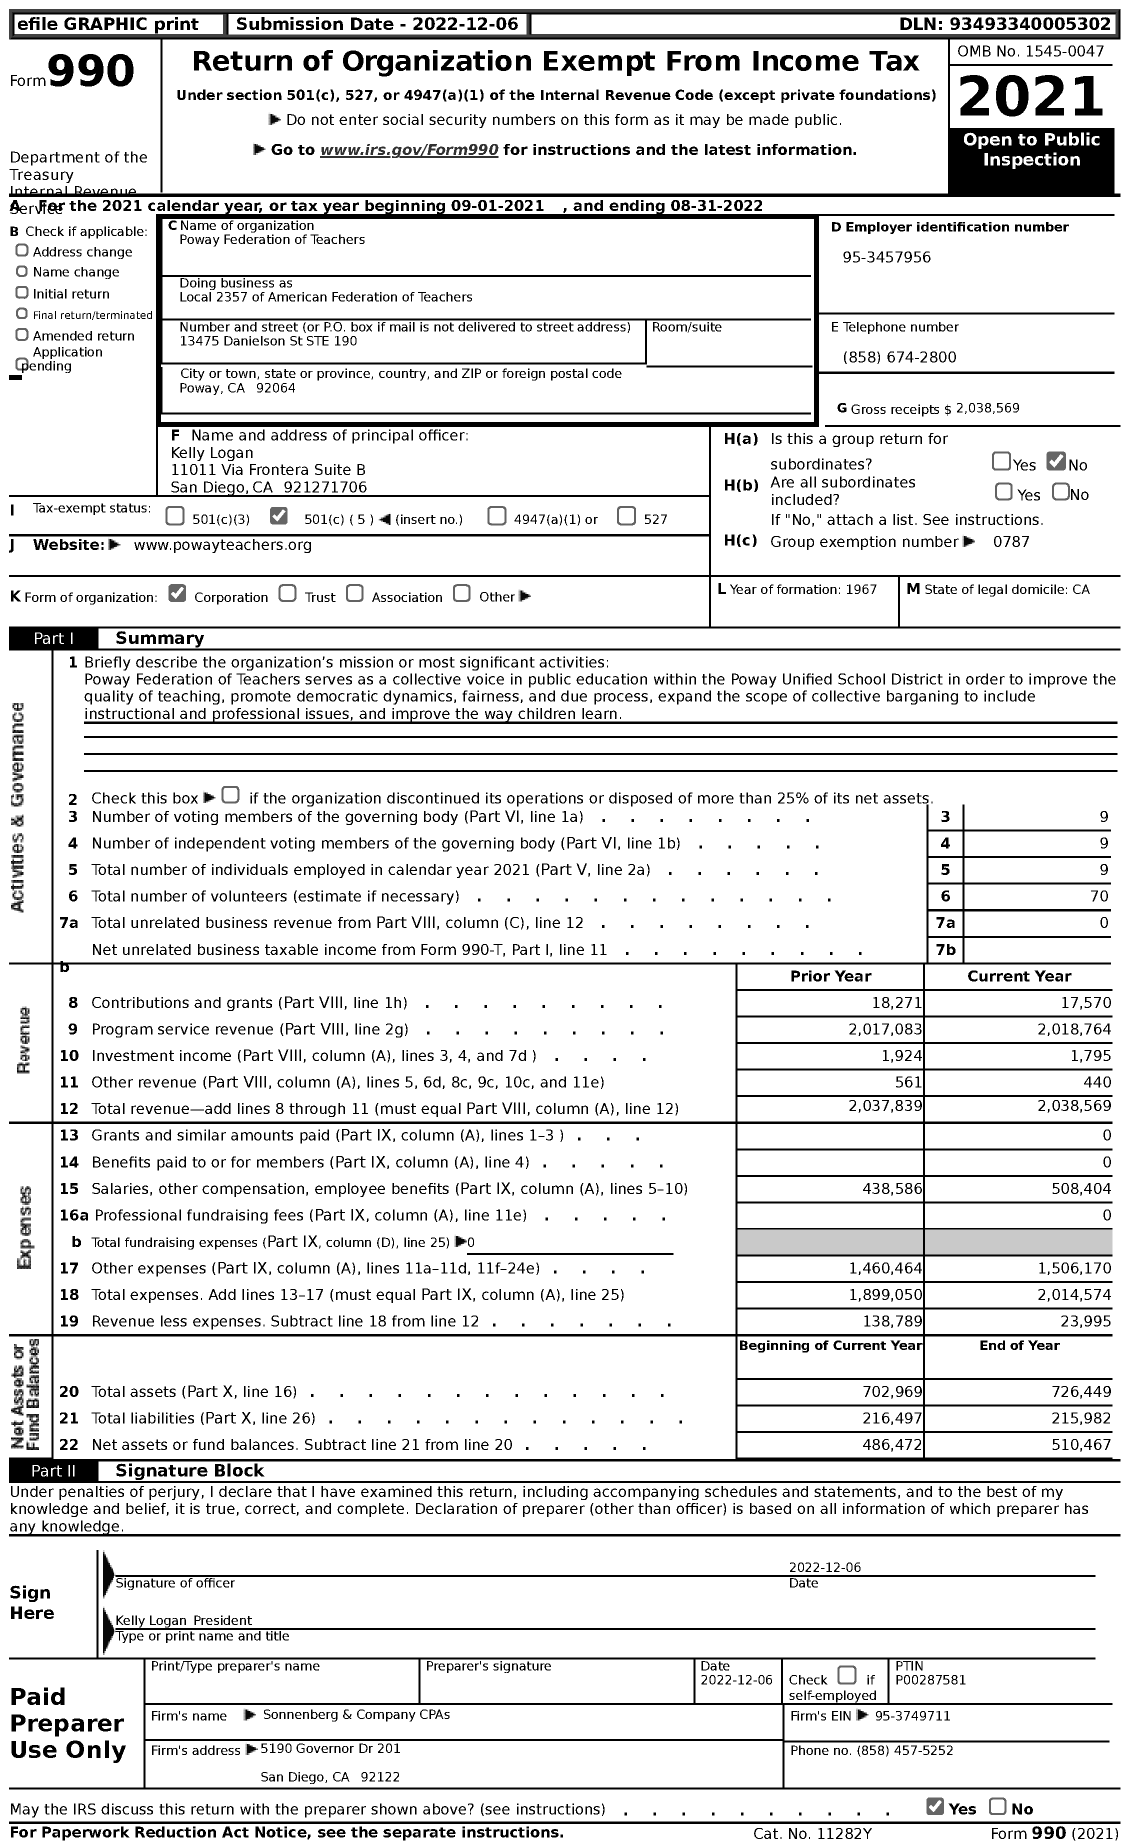 Image of first page of 2021 Form 990 for American Federation of Teachers - Local 2357 of American Federation of Teachers